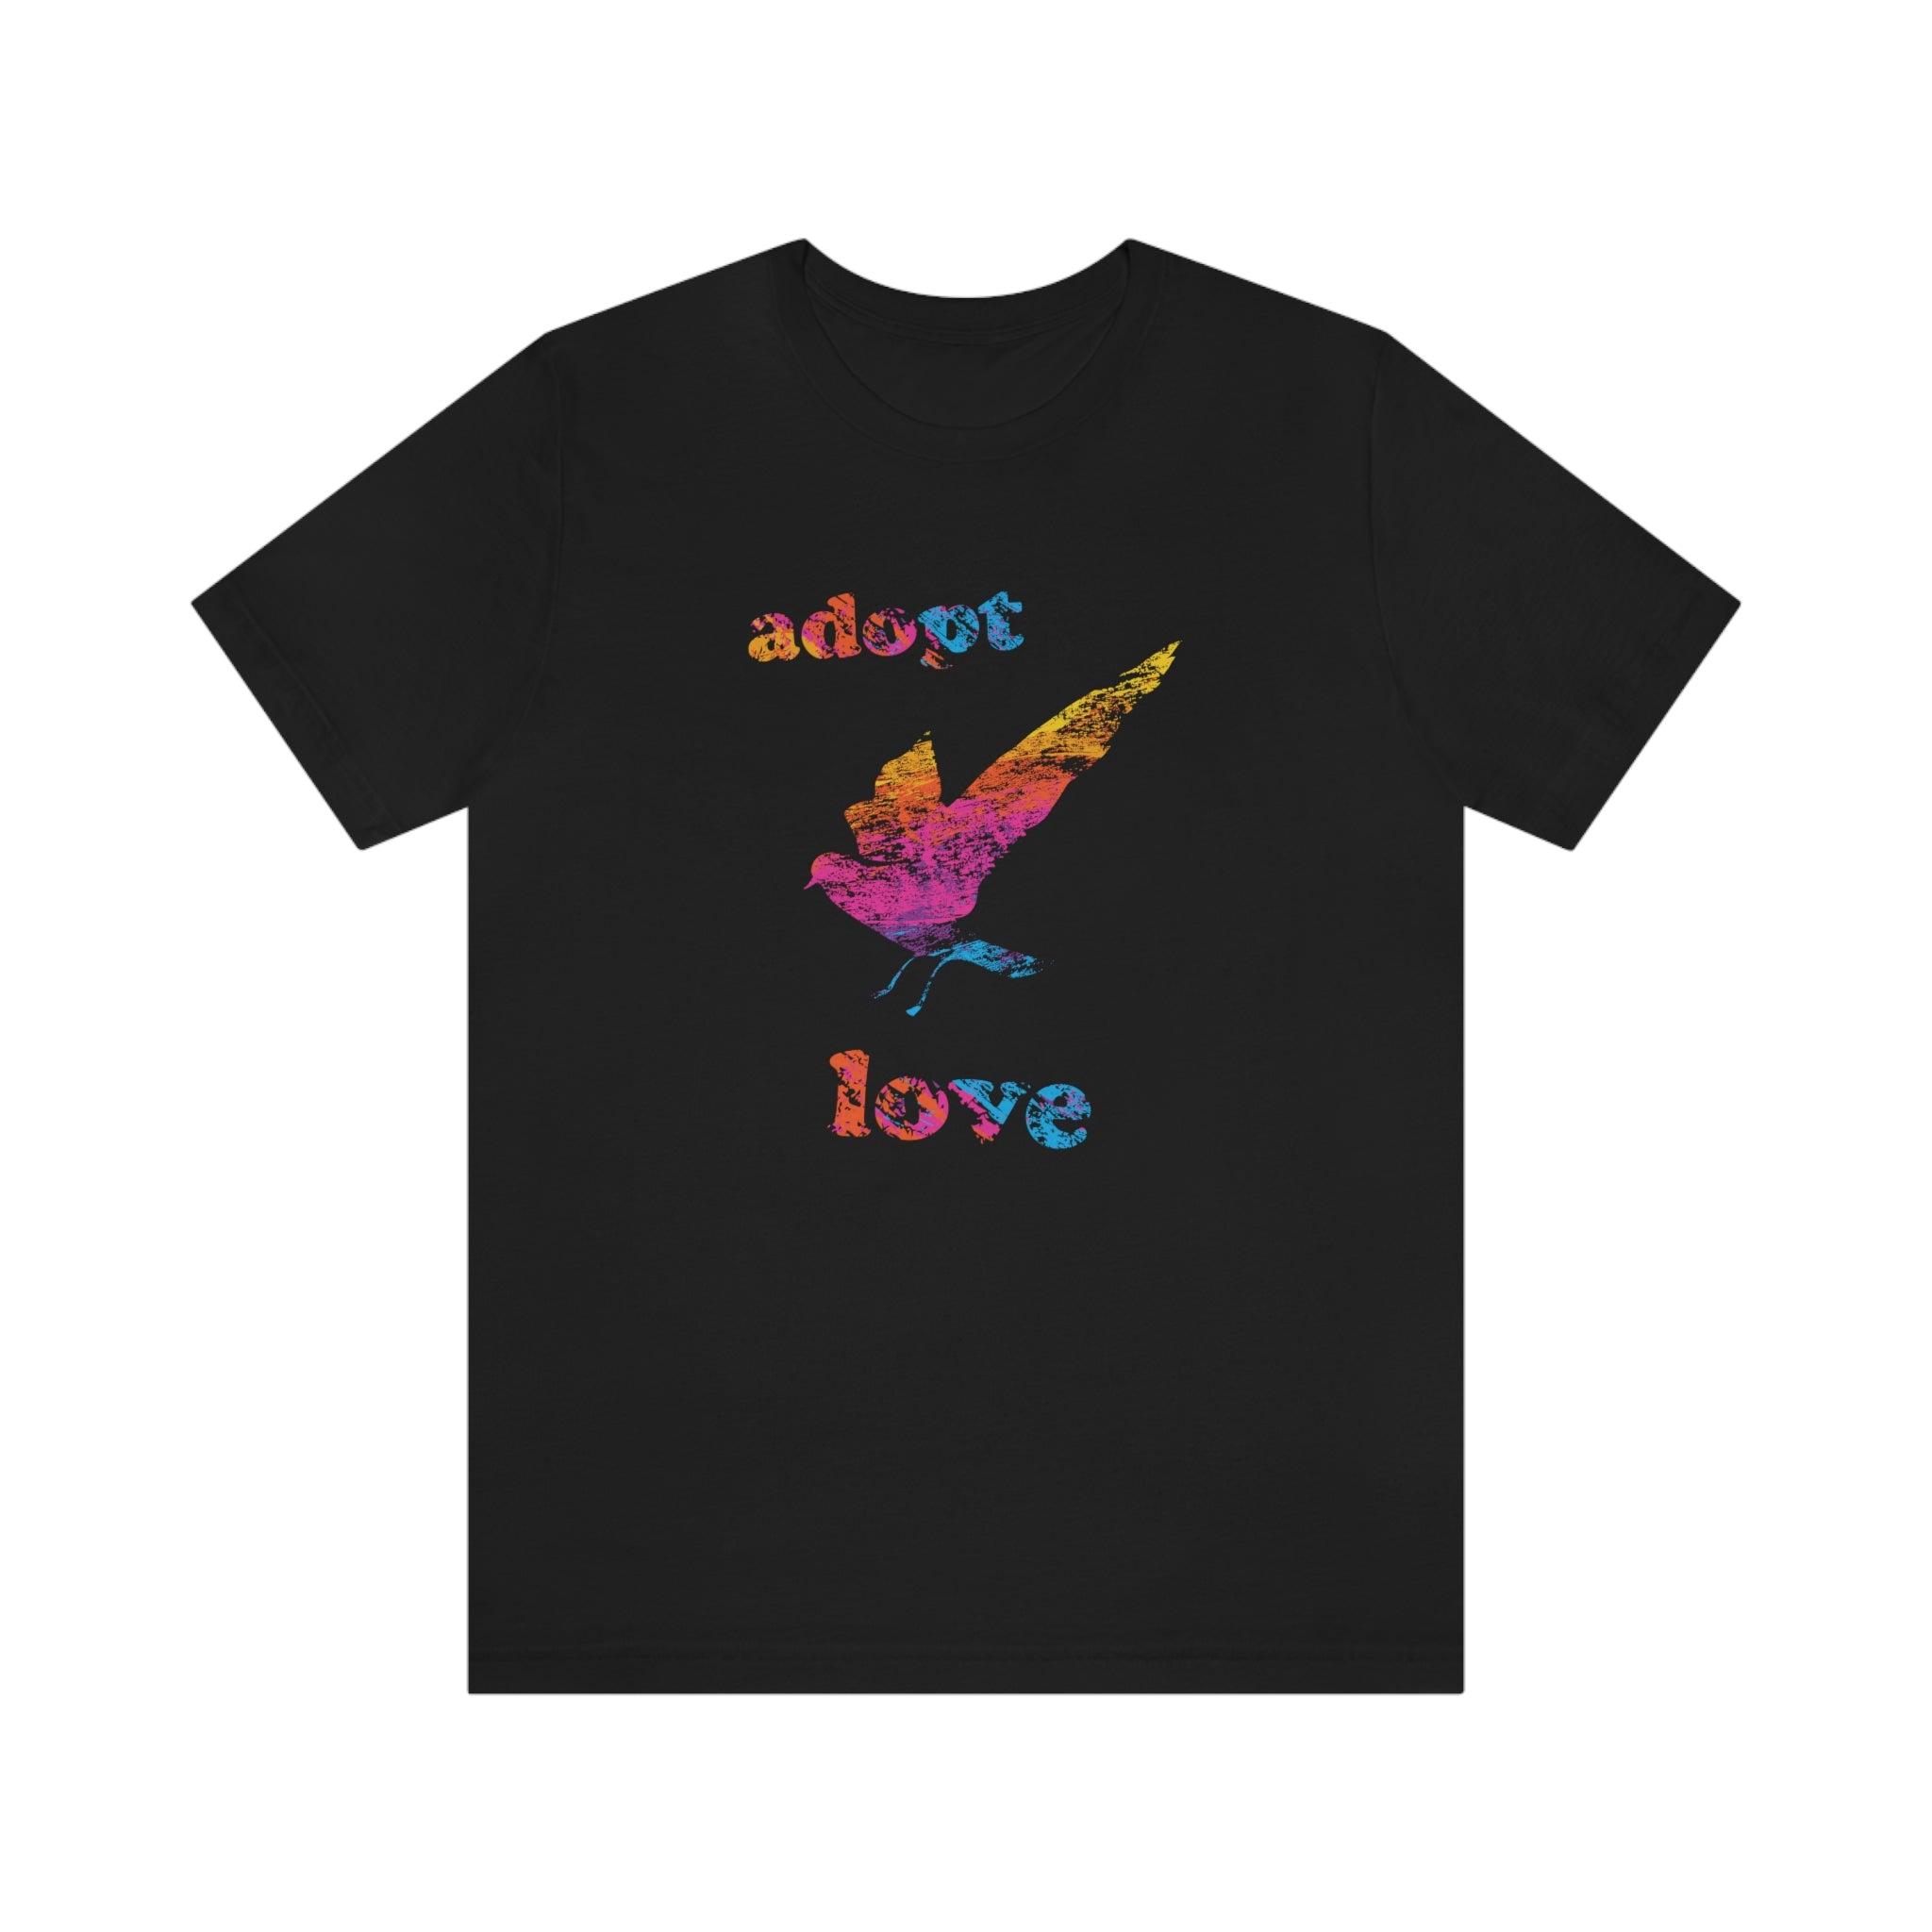 Adopt Love Bird with Colour Lettering : Unisex 100% Comfy Cotton T-Shirt, Supporting Humane Animal Shelters